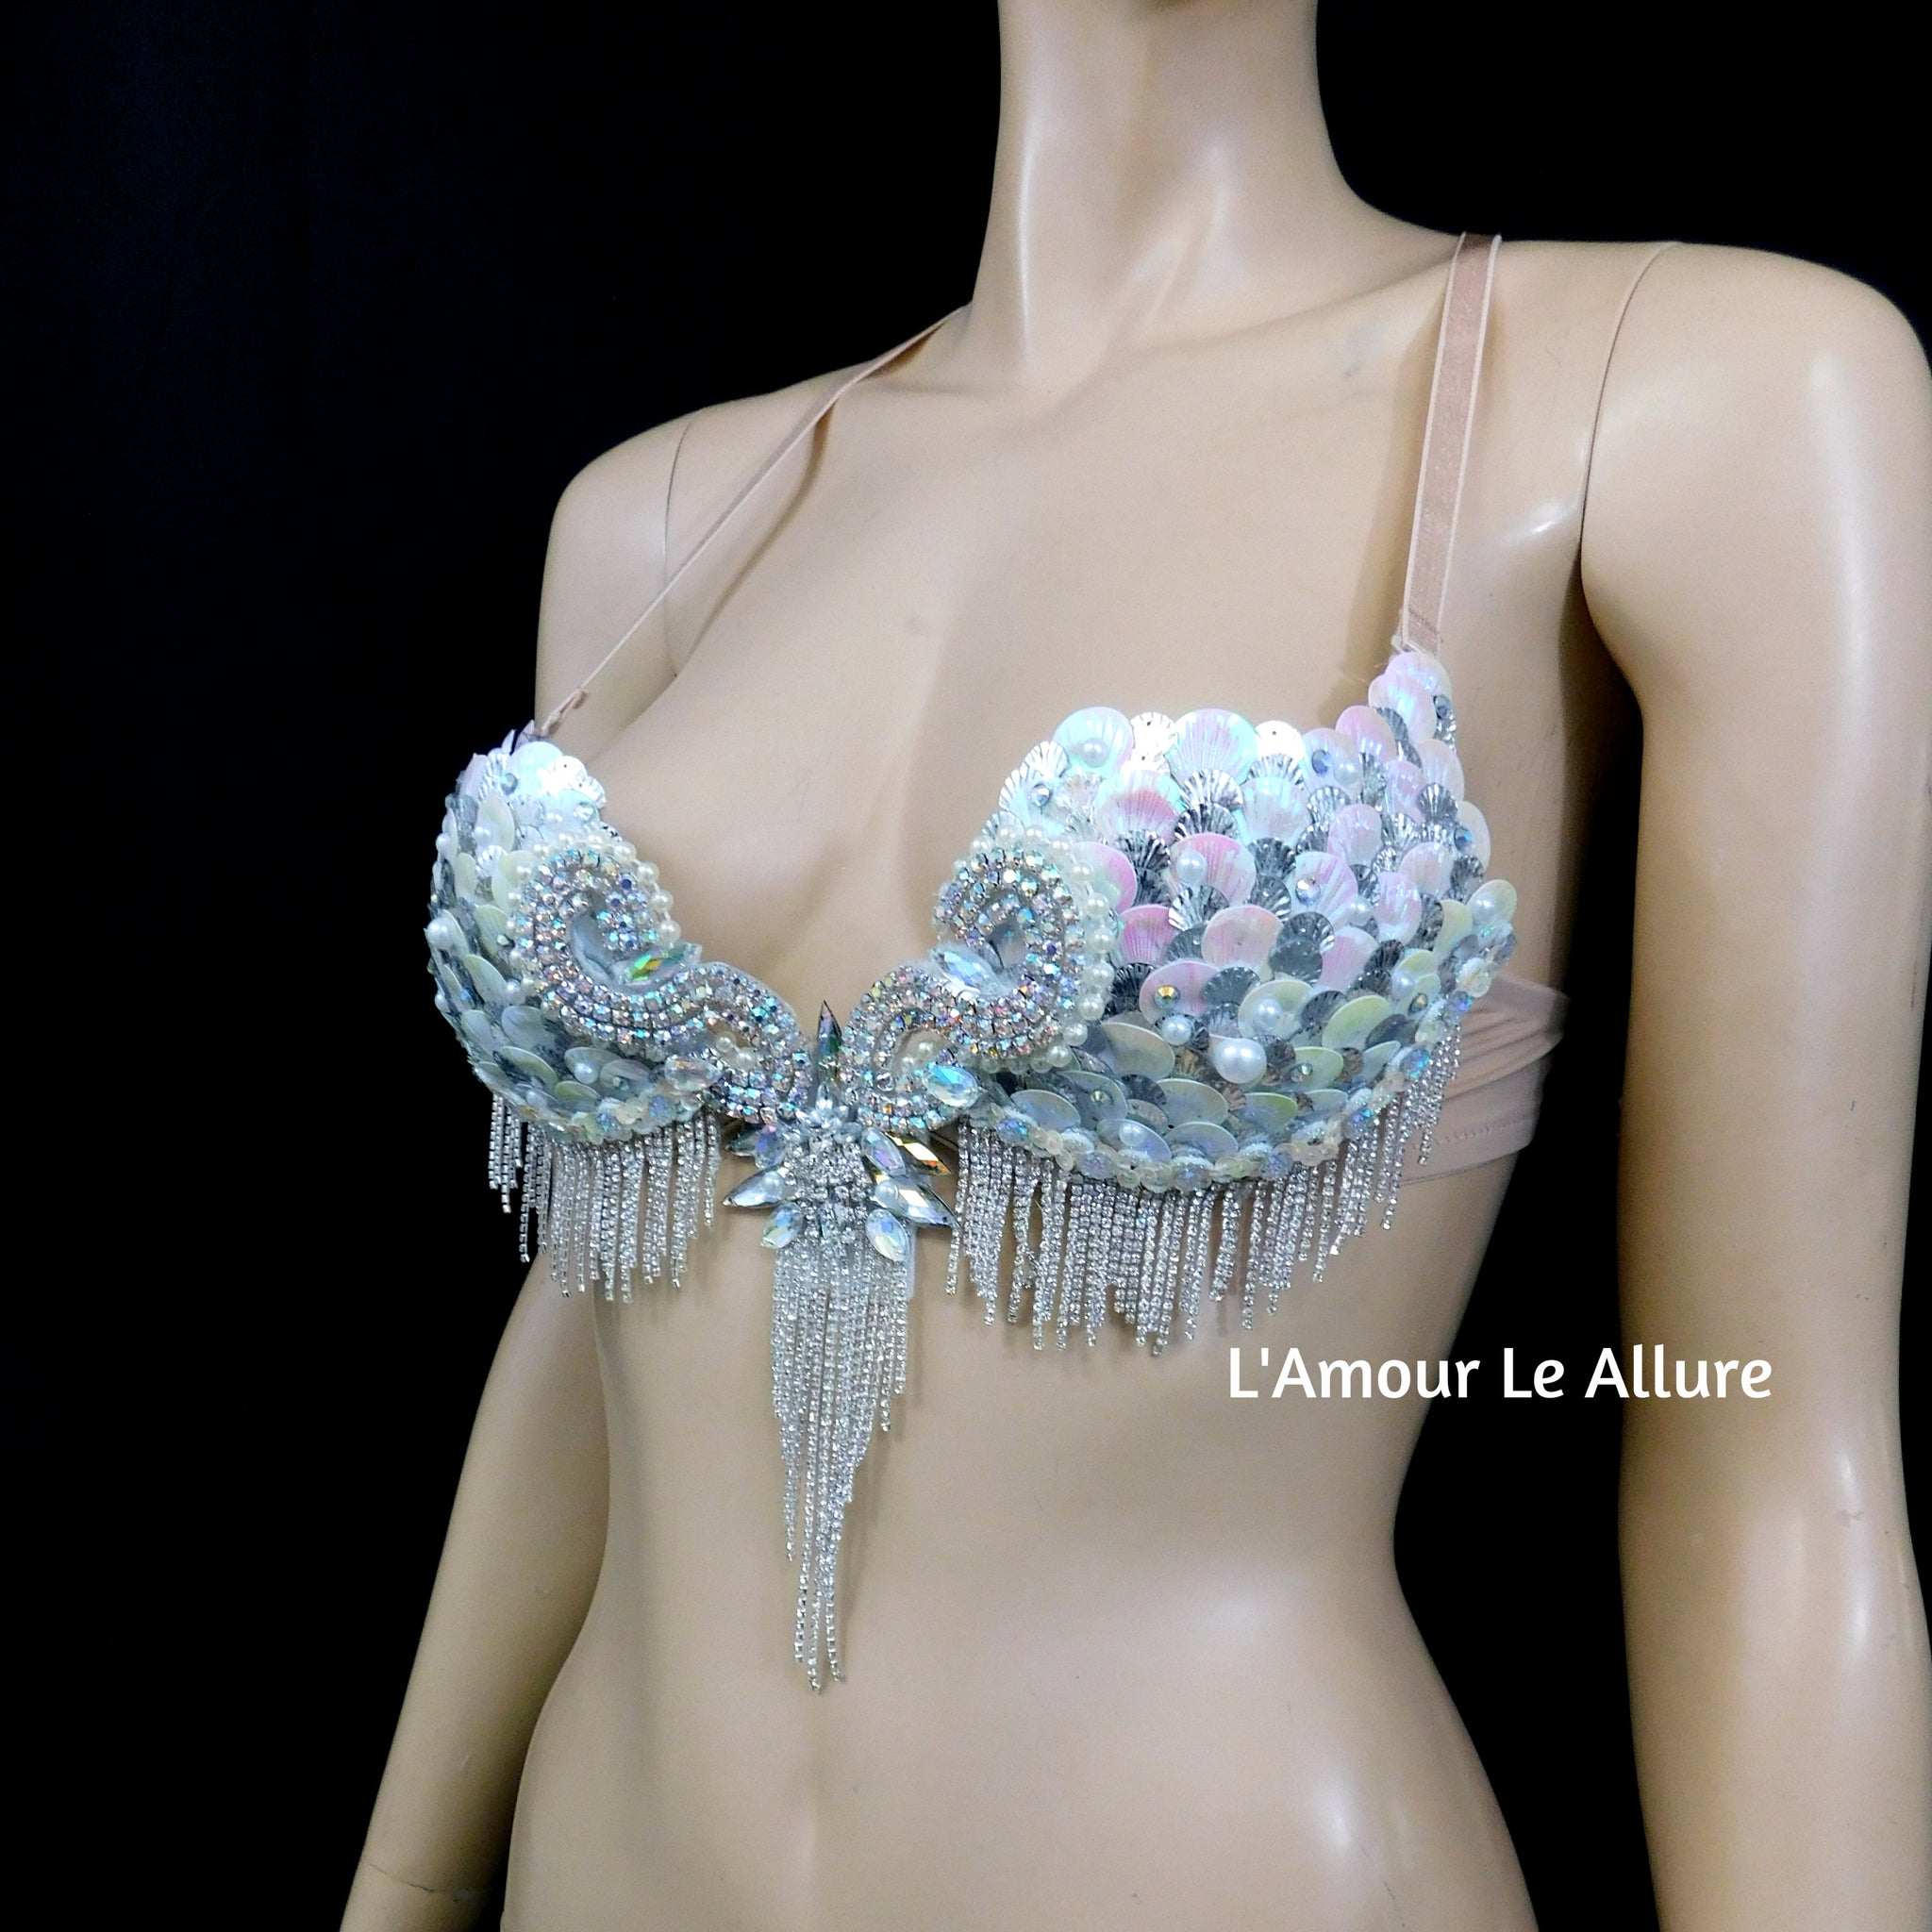 White and Silver Mermaid Rave Bra and Bottoms - Complete Outfit